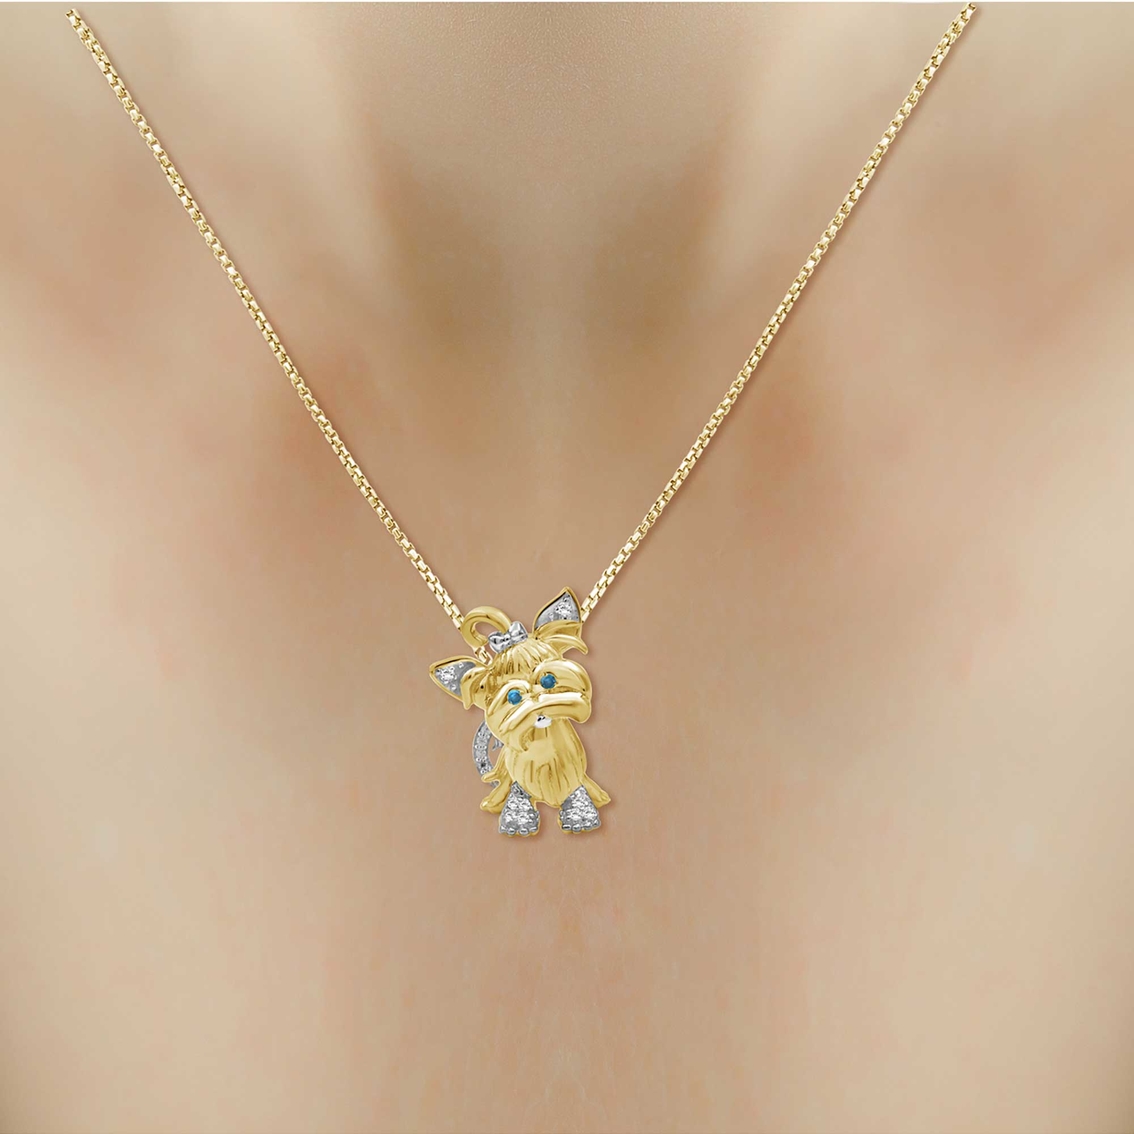 Animal's Rock 14K Gold Over Sterling Silver Accent Diamond Yorkie Dog Pendant - Image 4 of 4